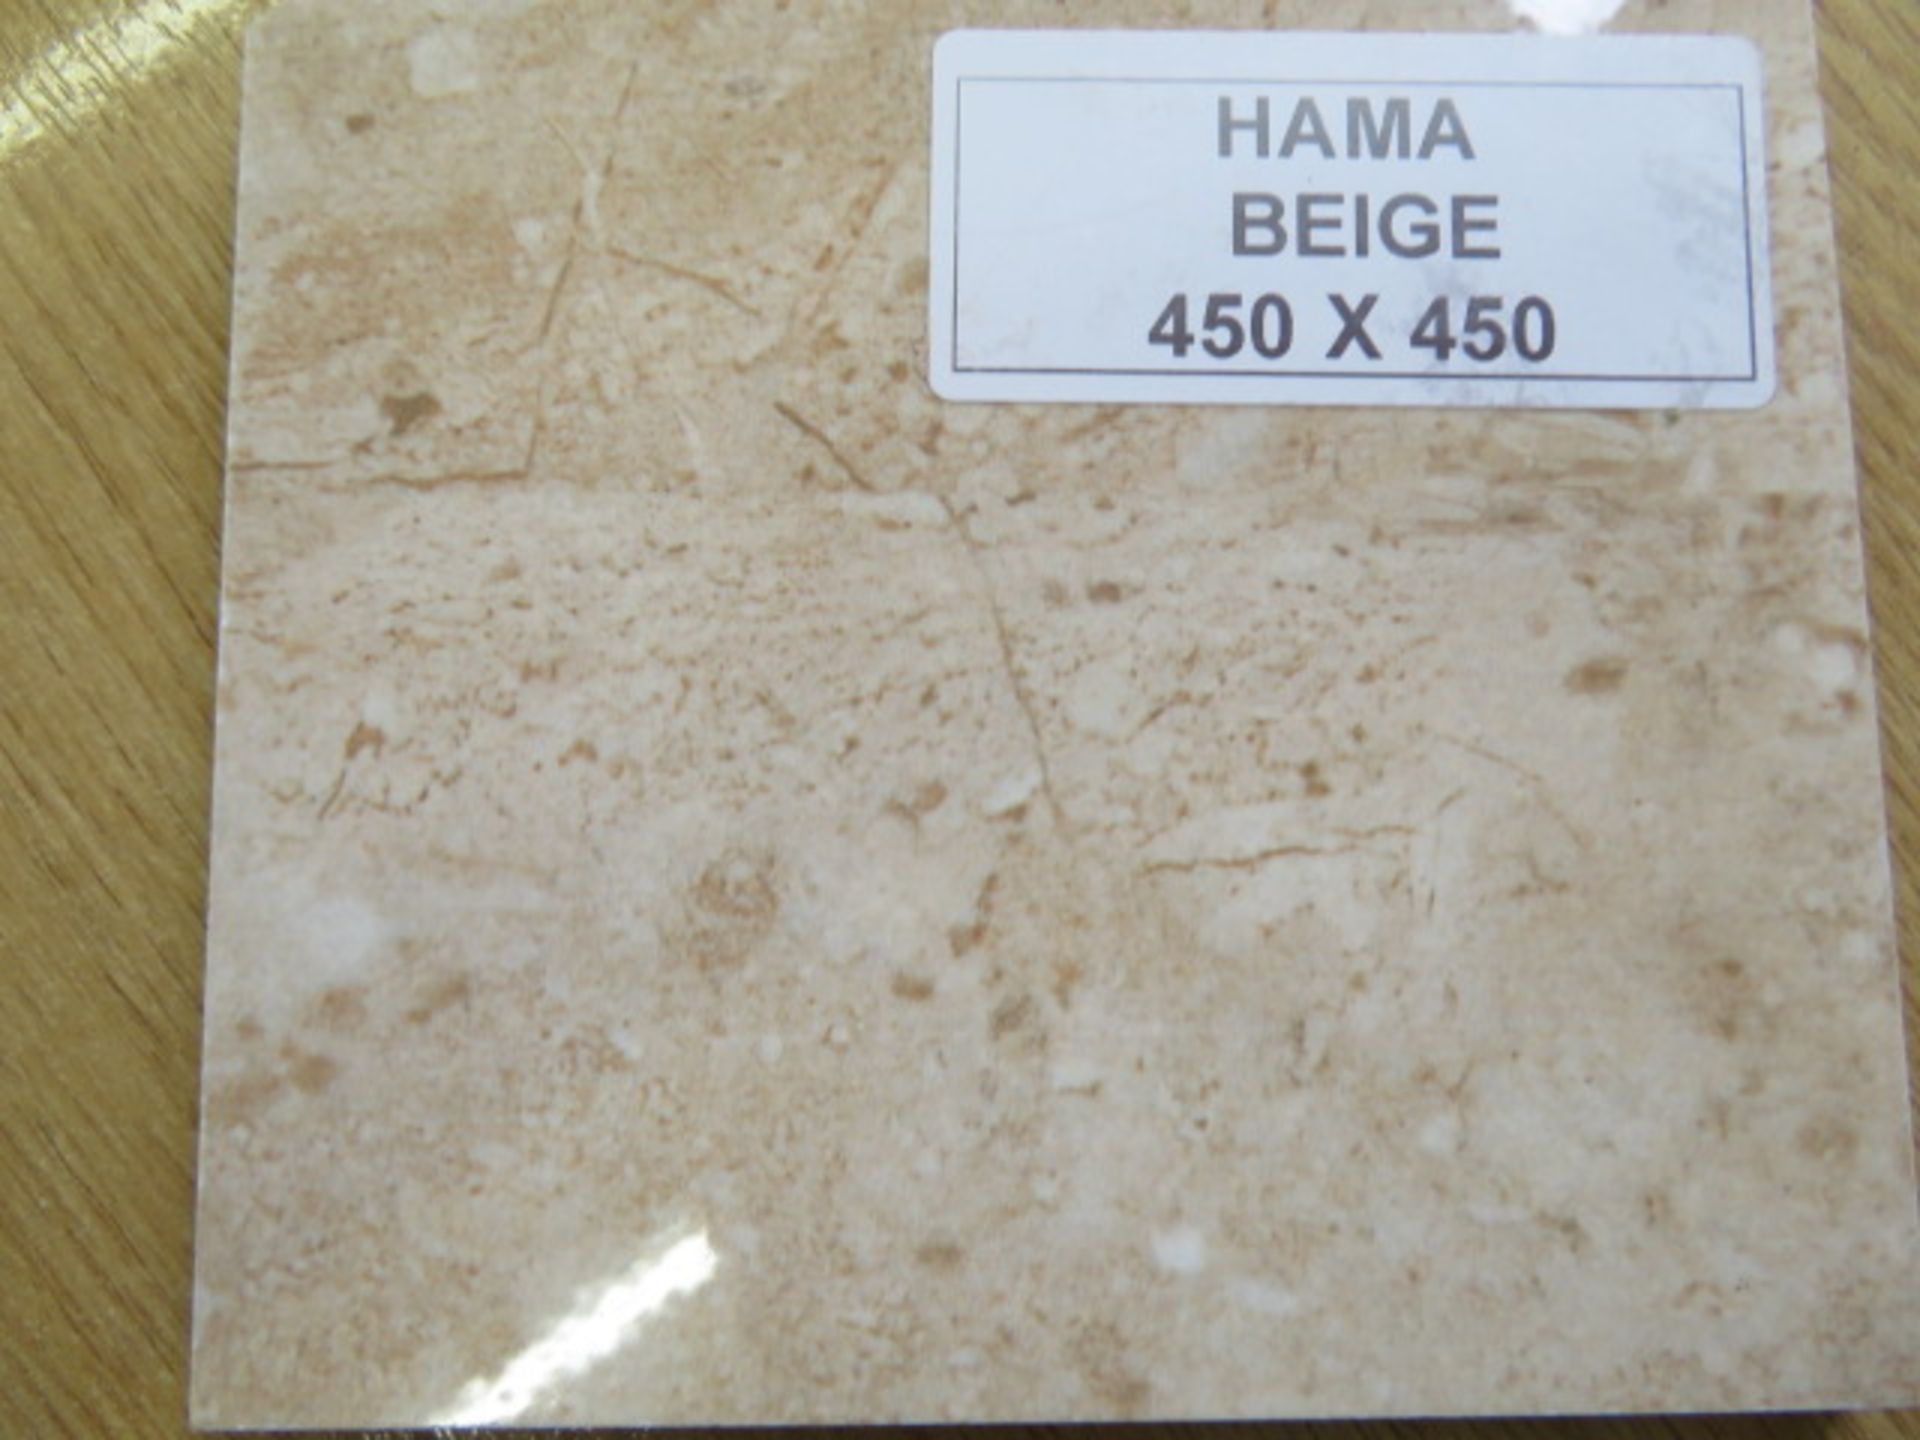 NEW 8.52m2 Hama Beige Wall and Floor Tiles. 450x450mm per tile, 10mm thick. Initially ceramic... - Bild 2 aus 3